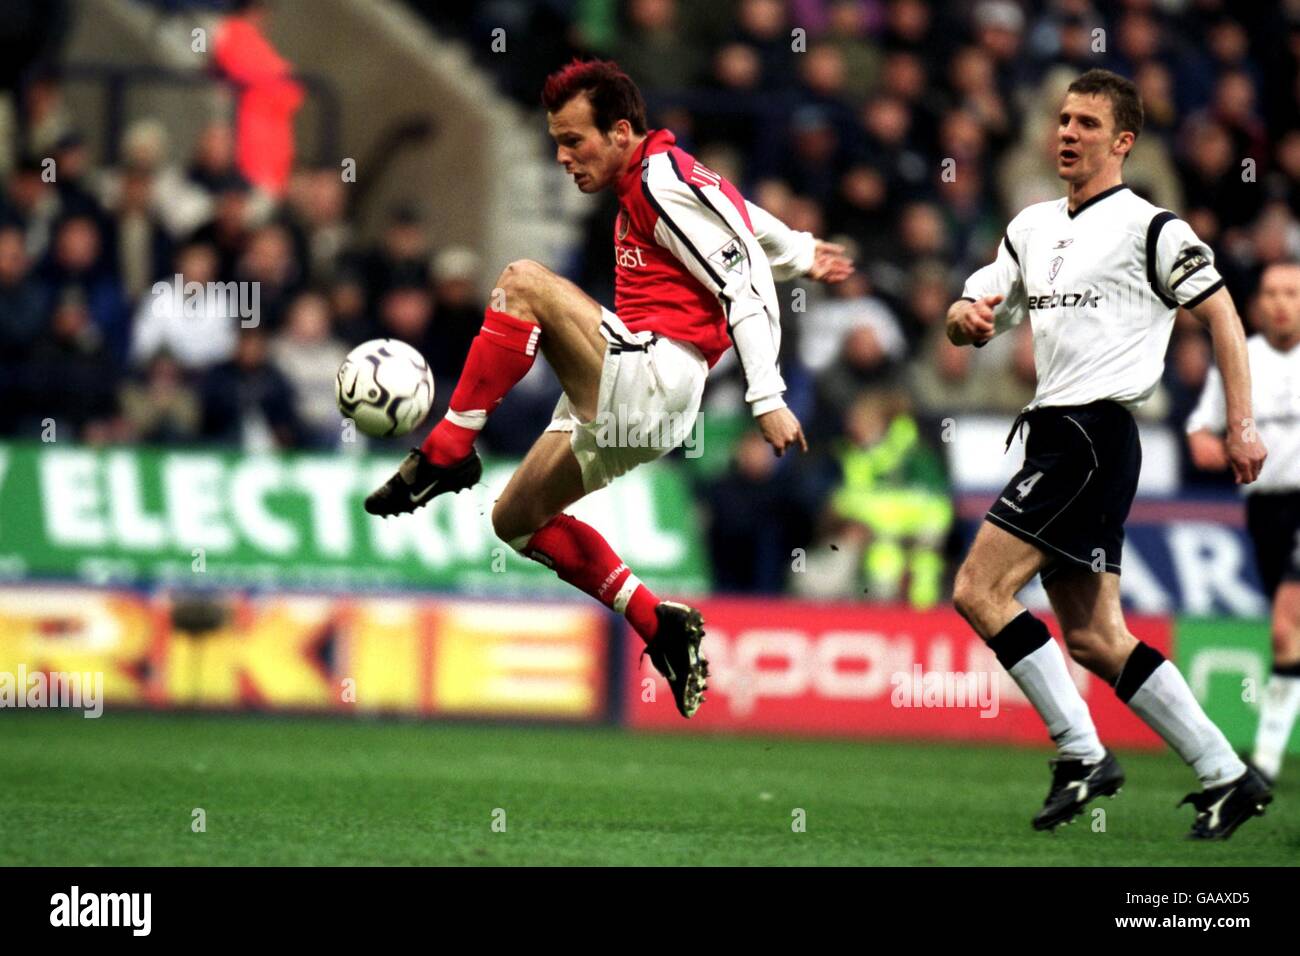 Soccer - FA Barclaycard Premiership - Bolton Wanderers v Arsenal. Arsenal's Fredrik Ljungberg is watched carefully by Bolton's Gudni Bergsson Stock Photo